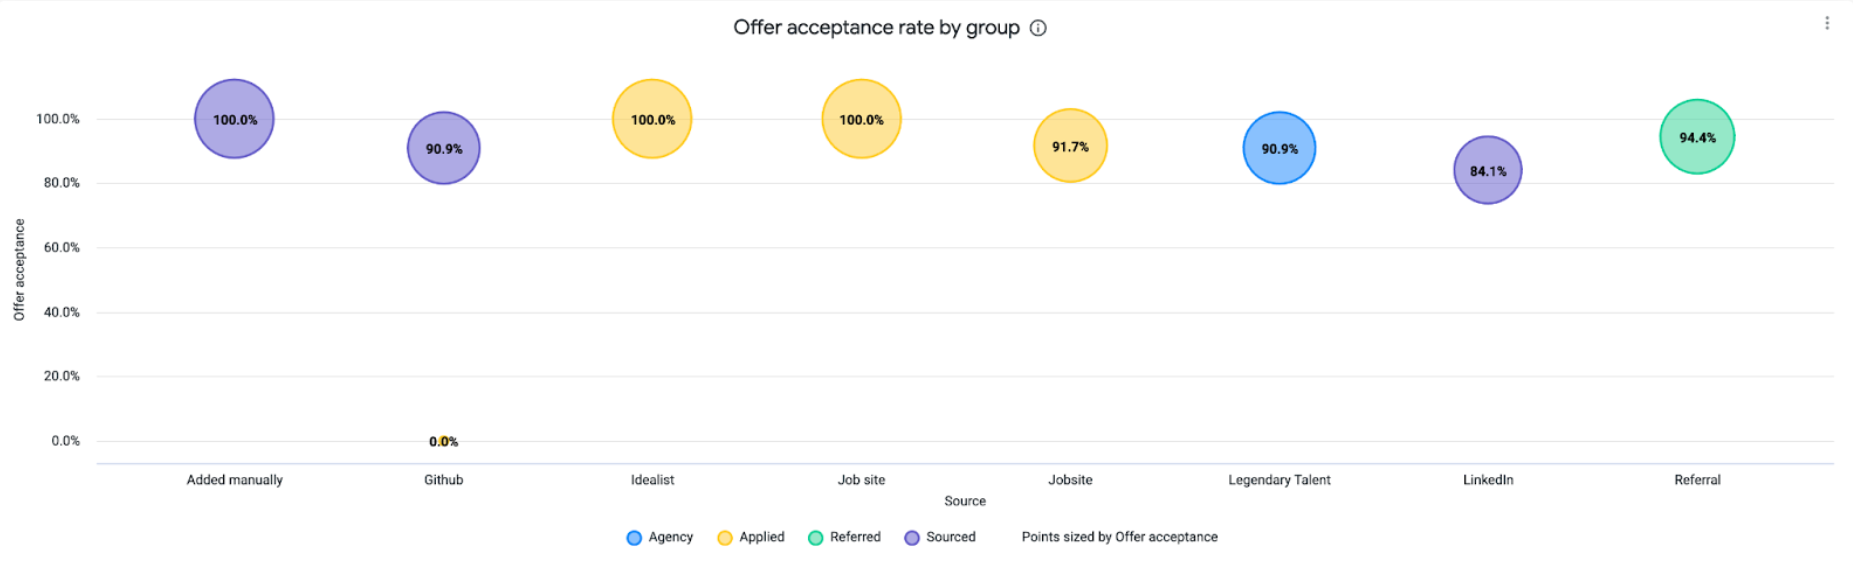 Offer accpetance rate by group scatter plot